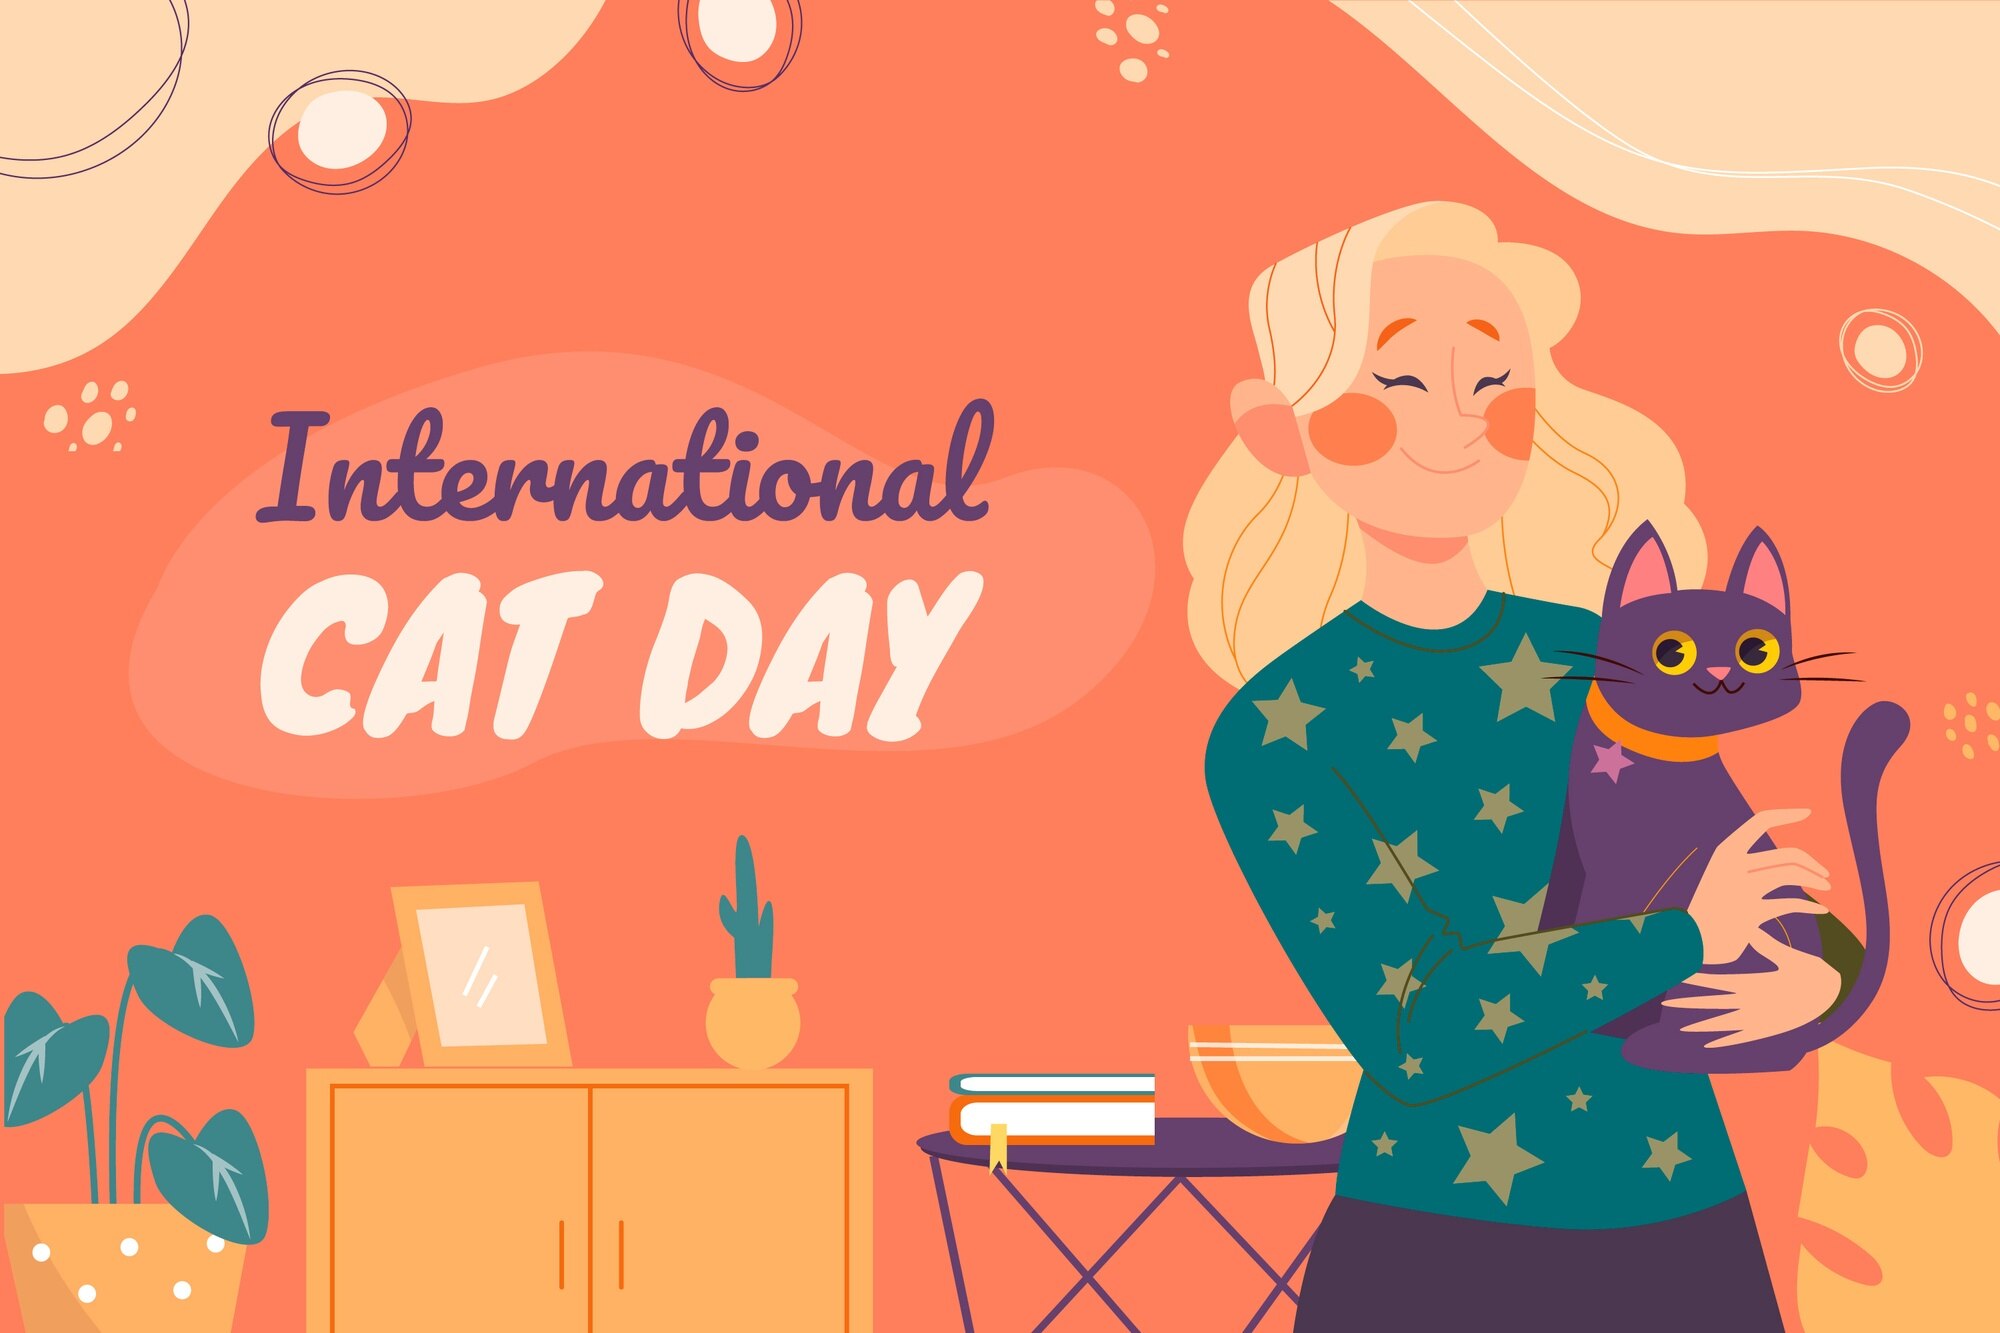 International Cat Day 2022: Quotes, Instagram Captions, Images, Messages, and Wishes, to raise awareness for cats and learn about ways to help and protect them